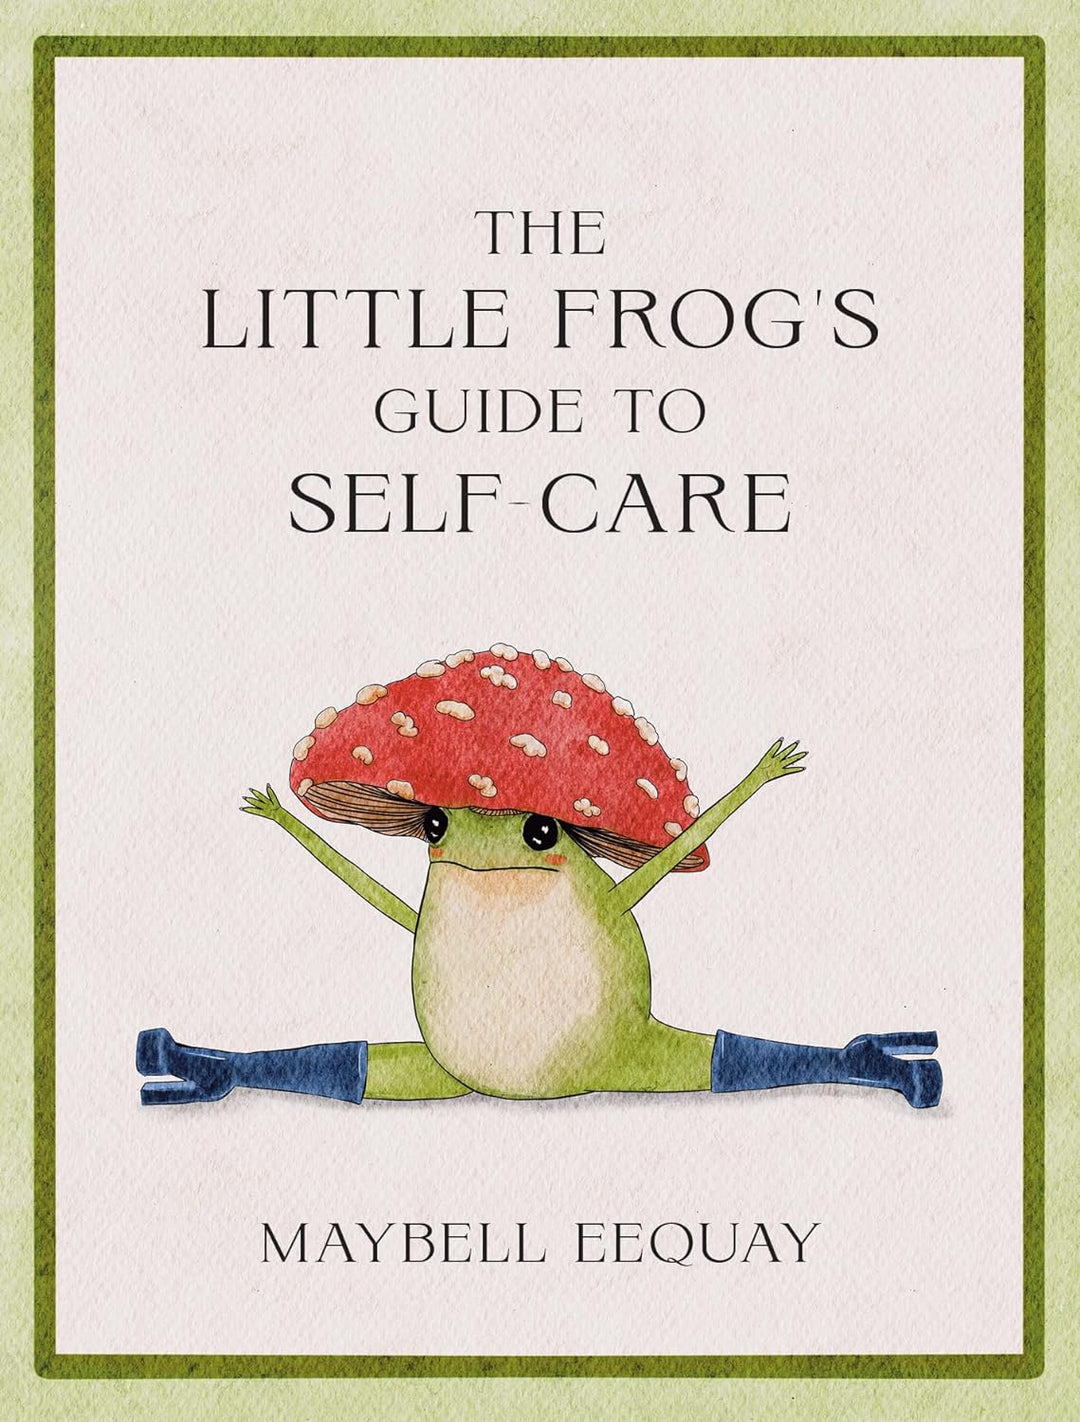 The Little Frog's Guide to Self-Care by Maybell Eequay